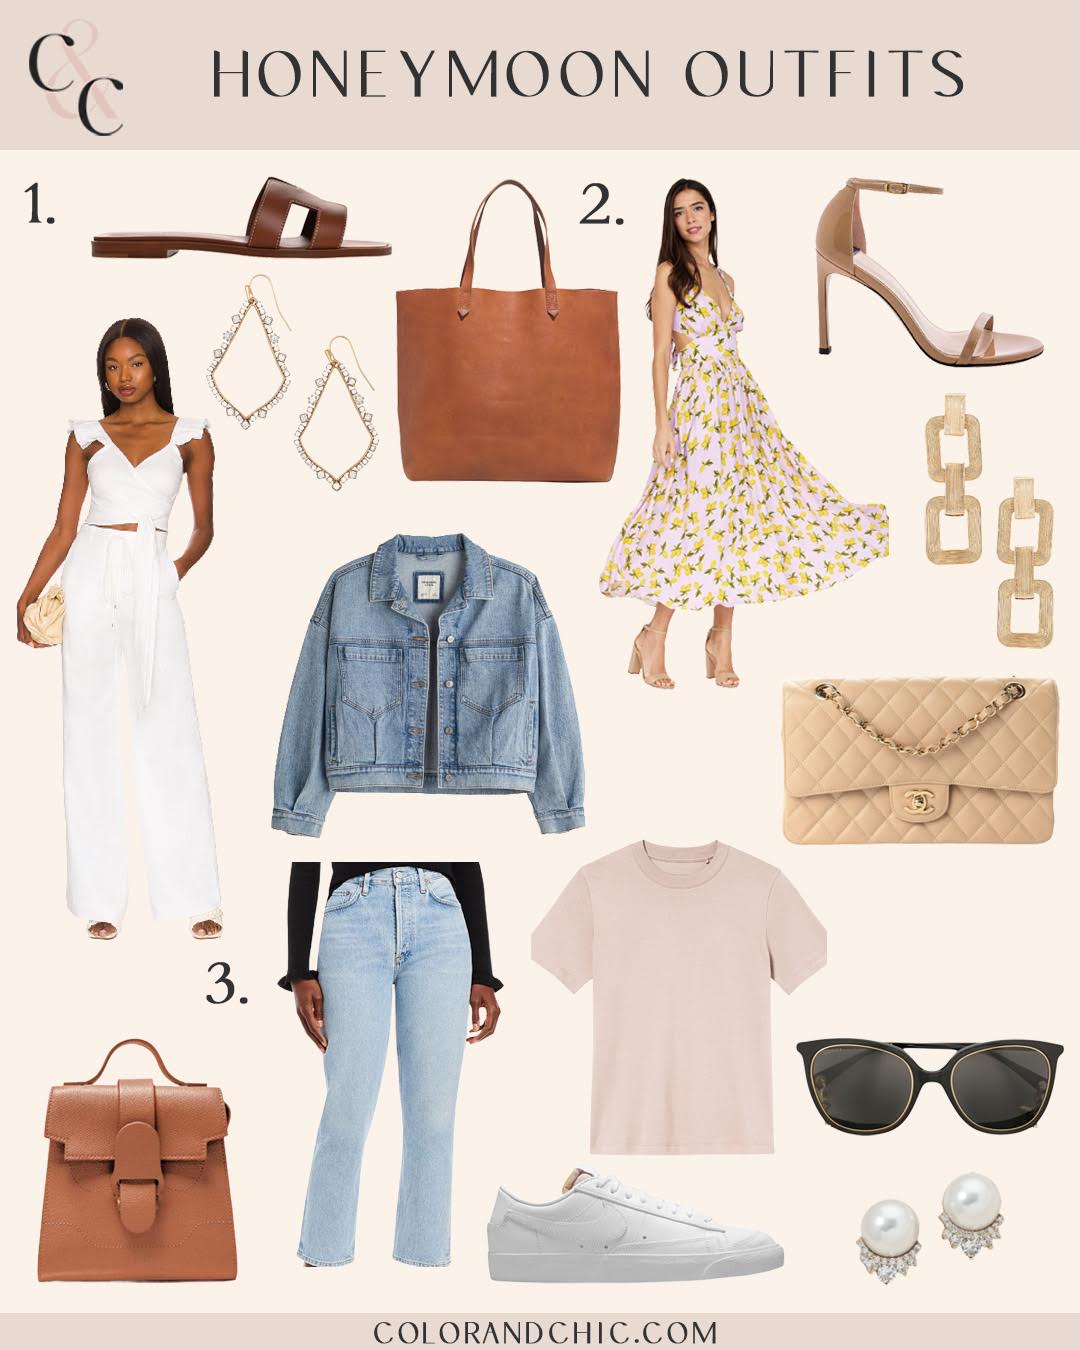 Honeymoon Outfits You'll Absolutely Love - Color & Chic